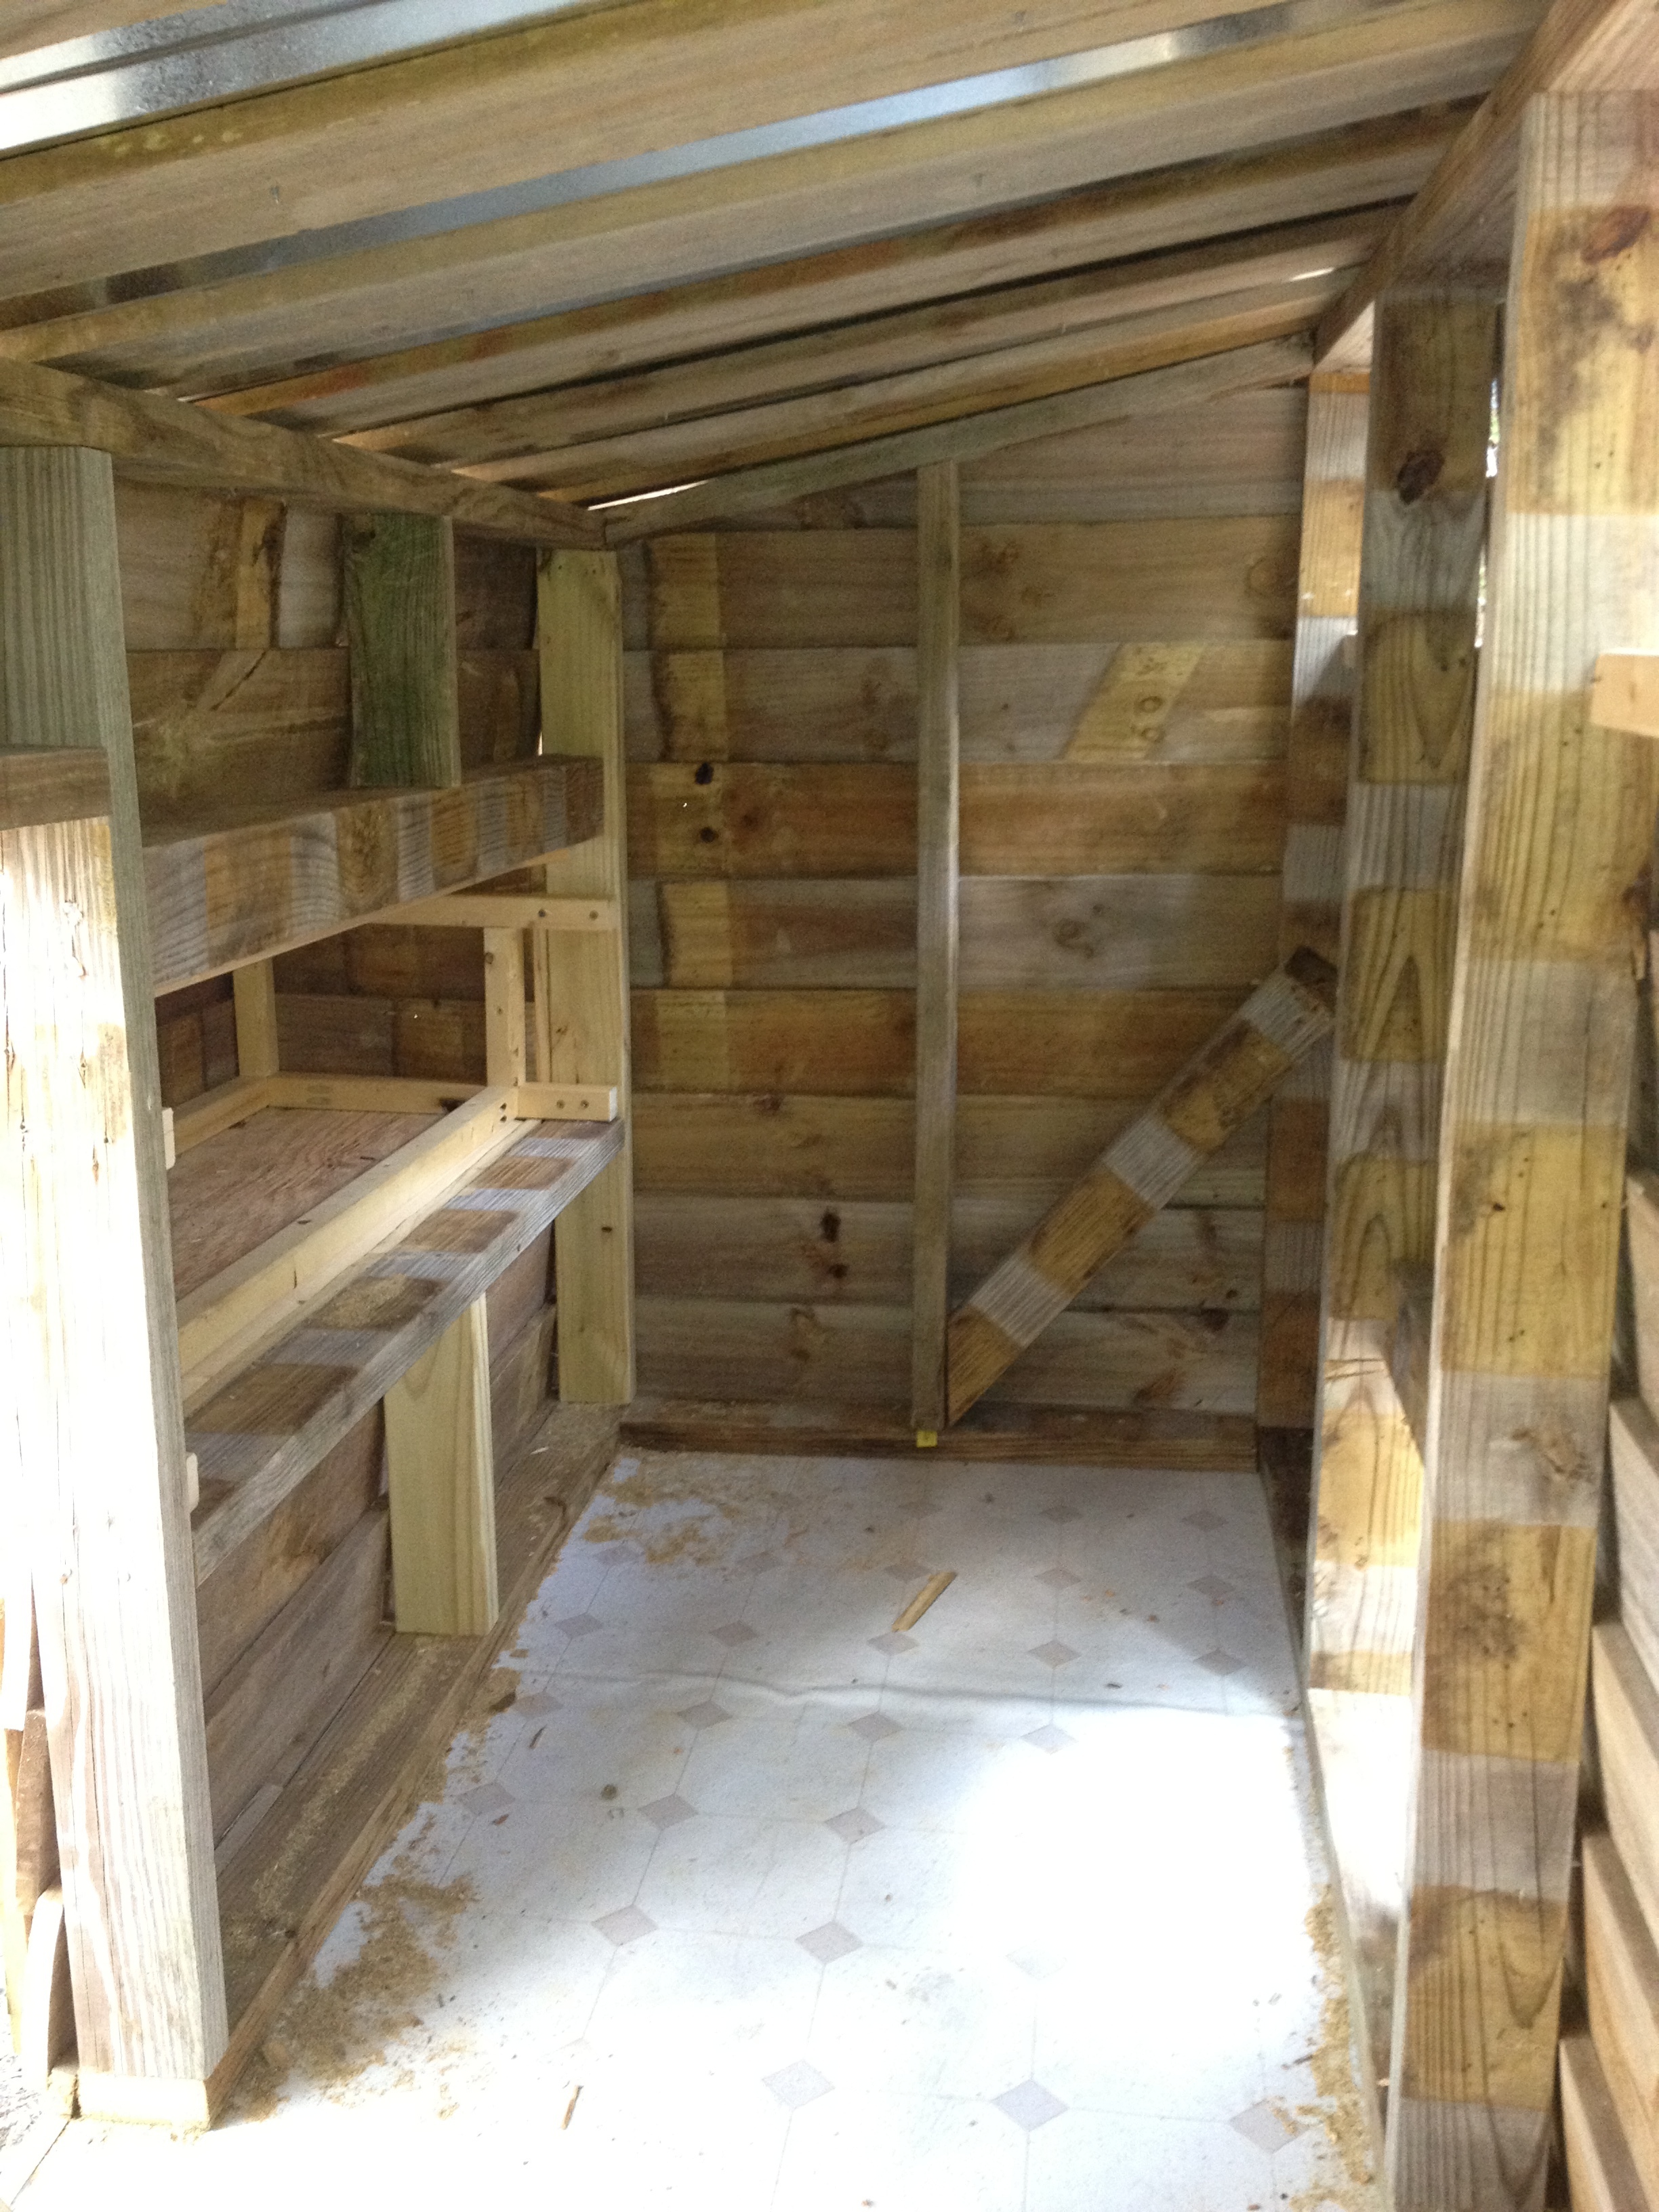 Inside the coop--the nesting boxes